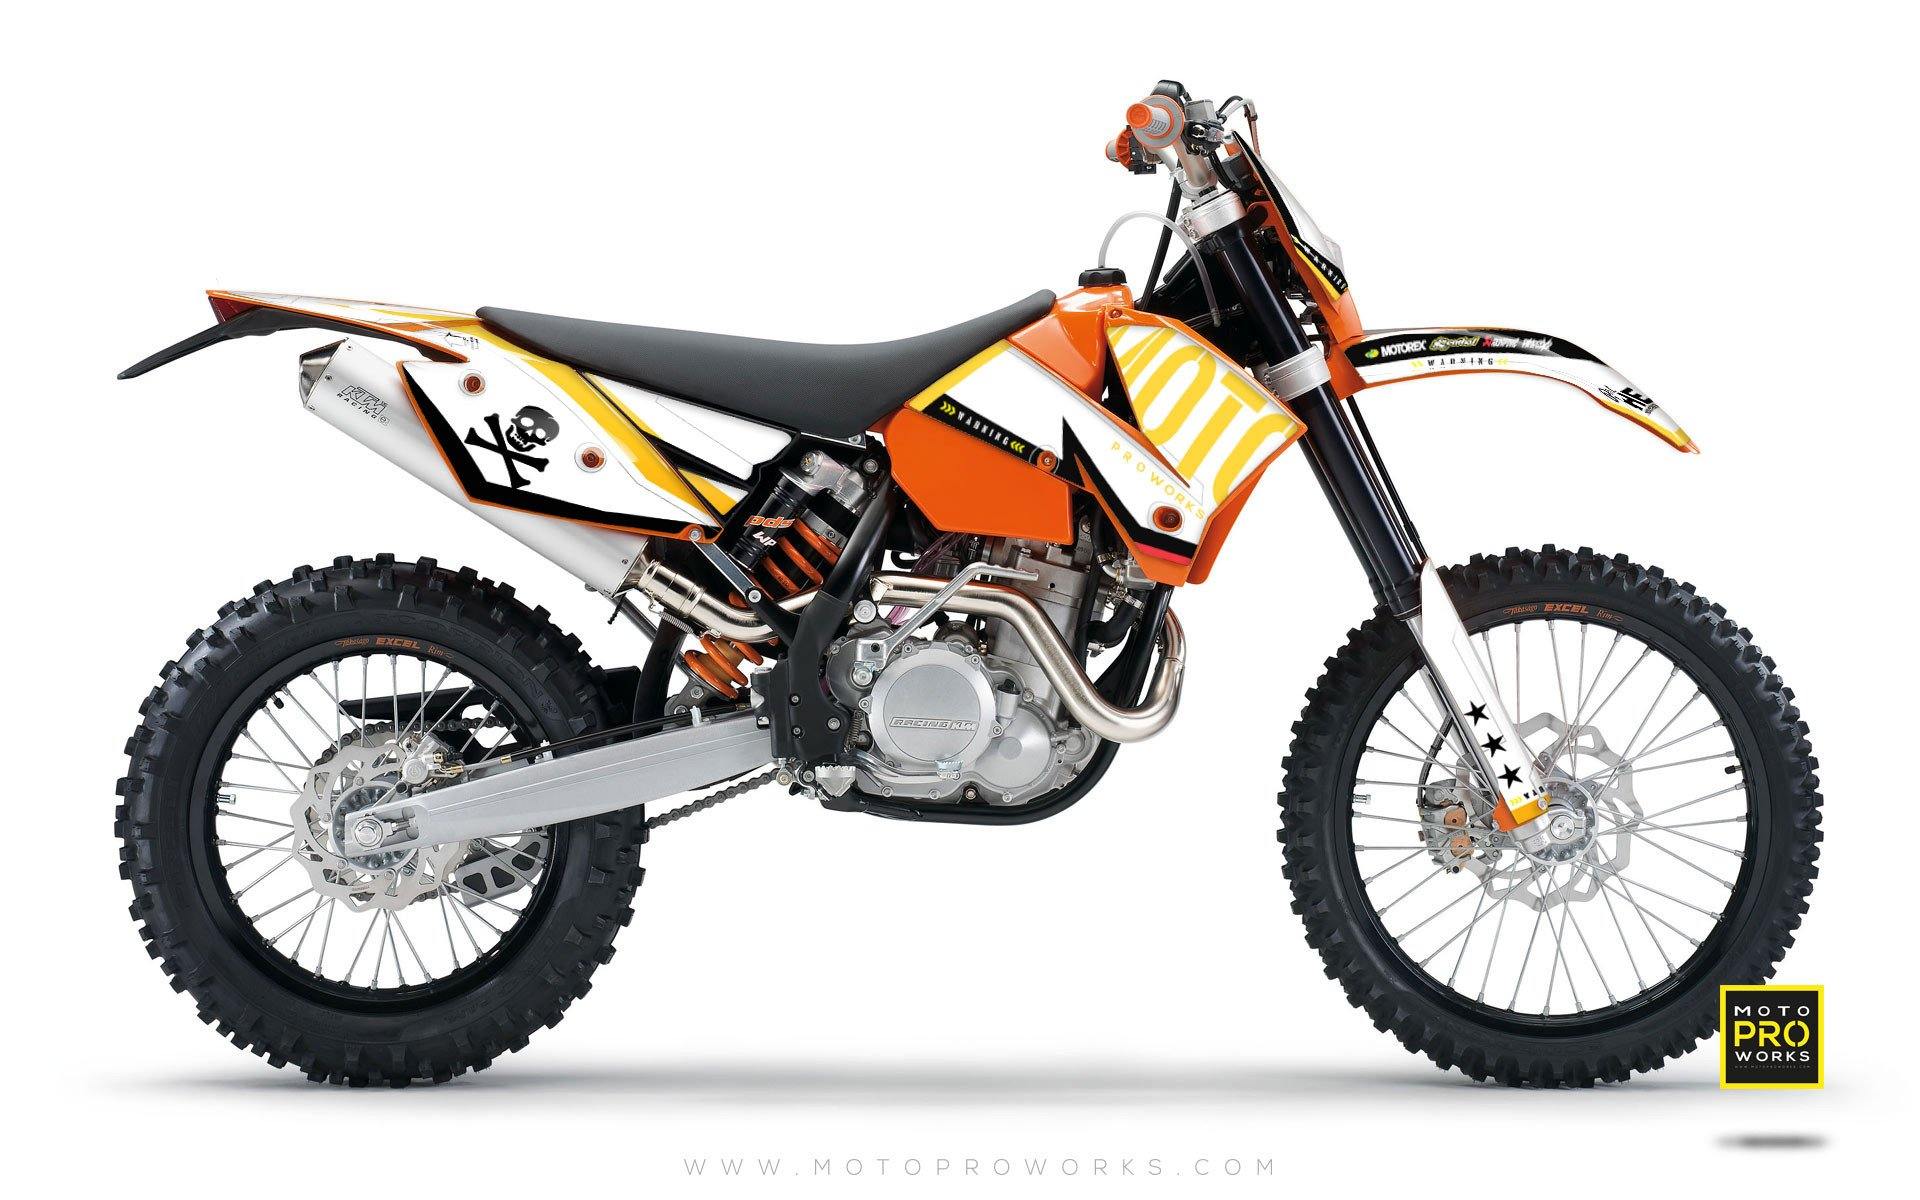 KTM GRAPHIC KIT - "GTECH" (white) - MotoProWorks | Decals and Bike Graphic kit